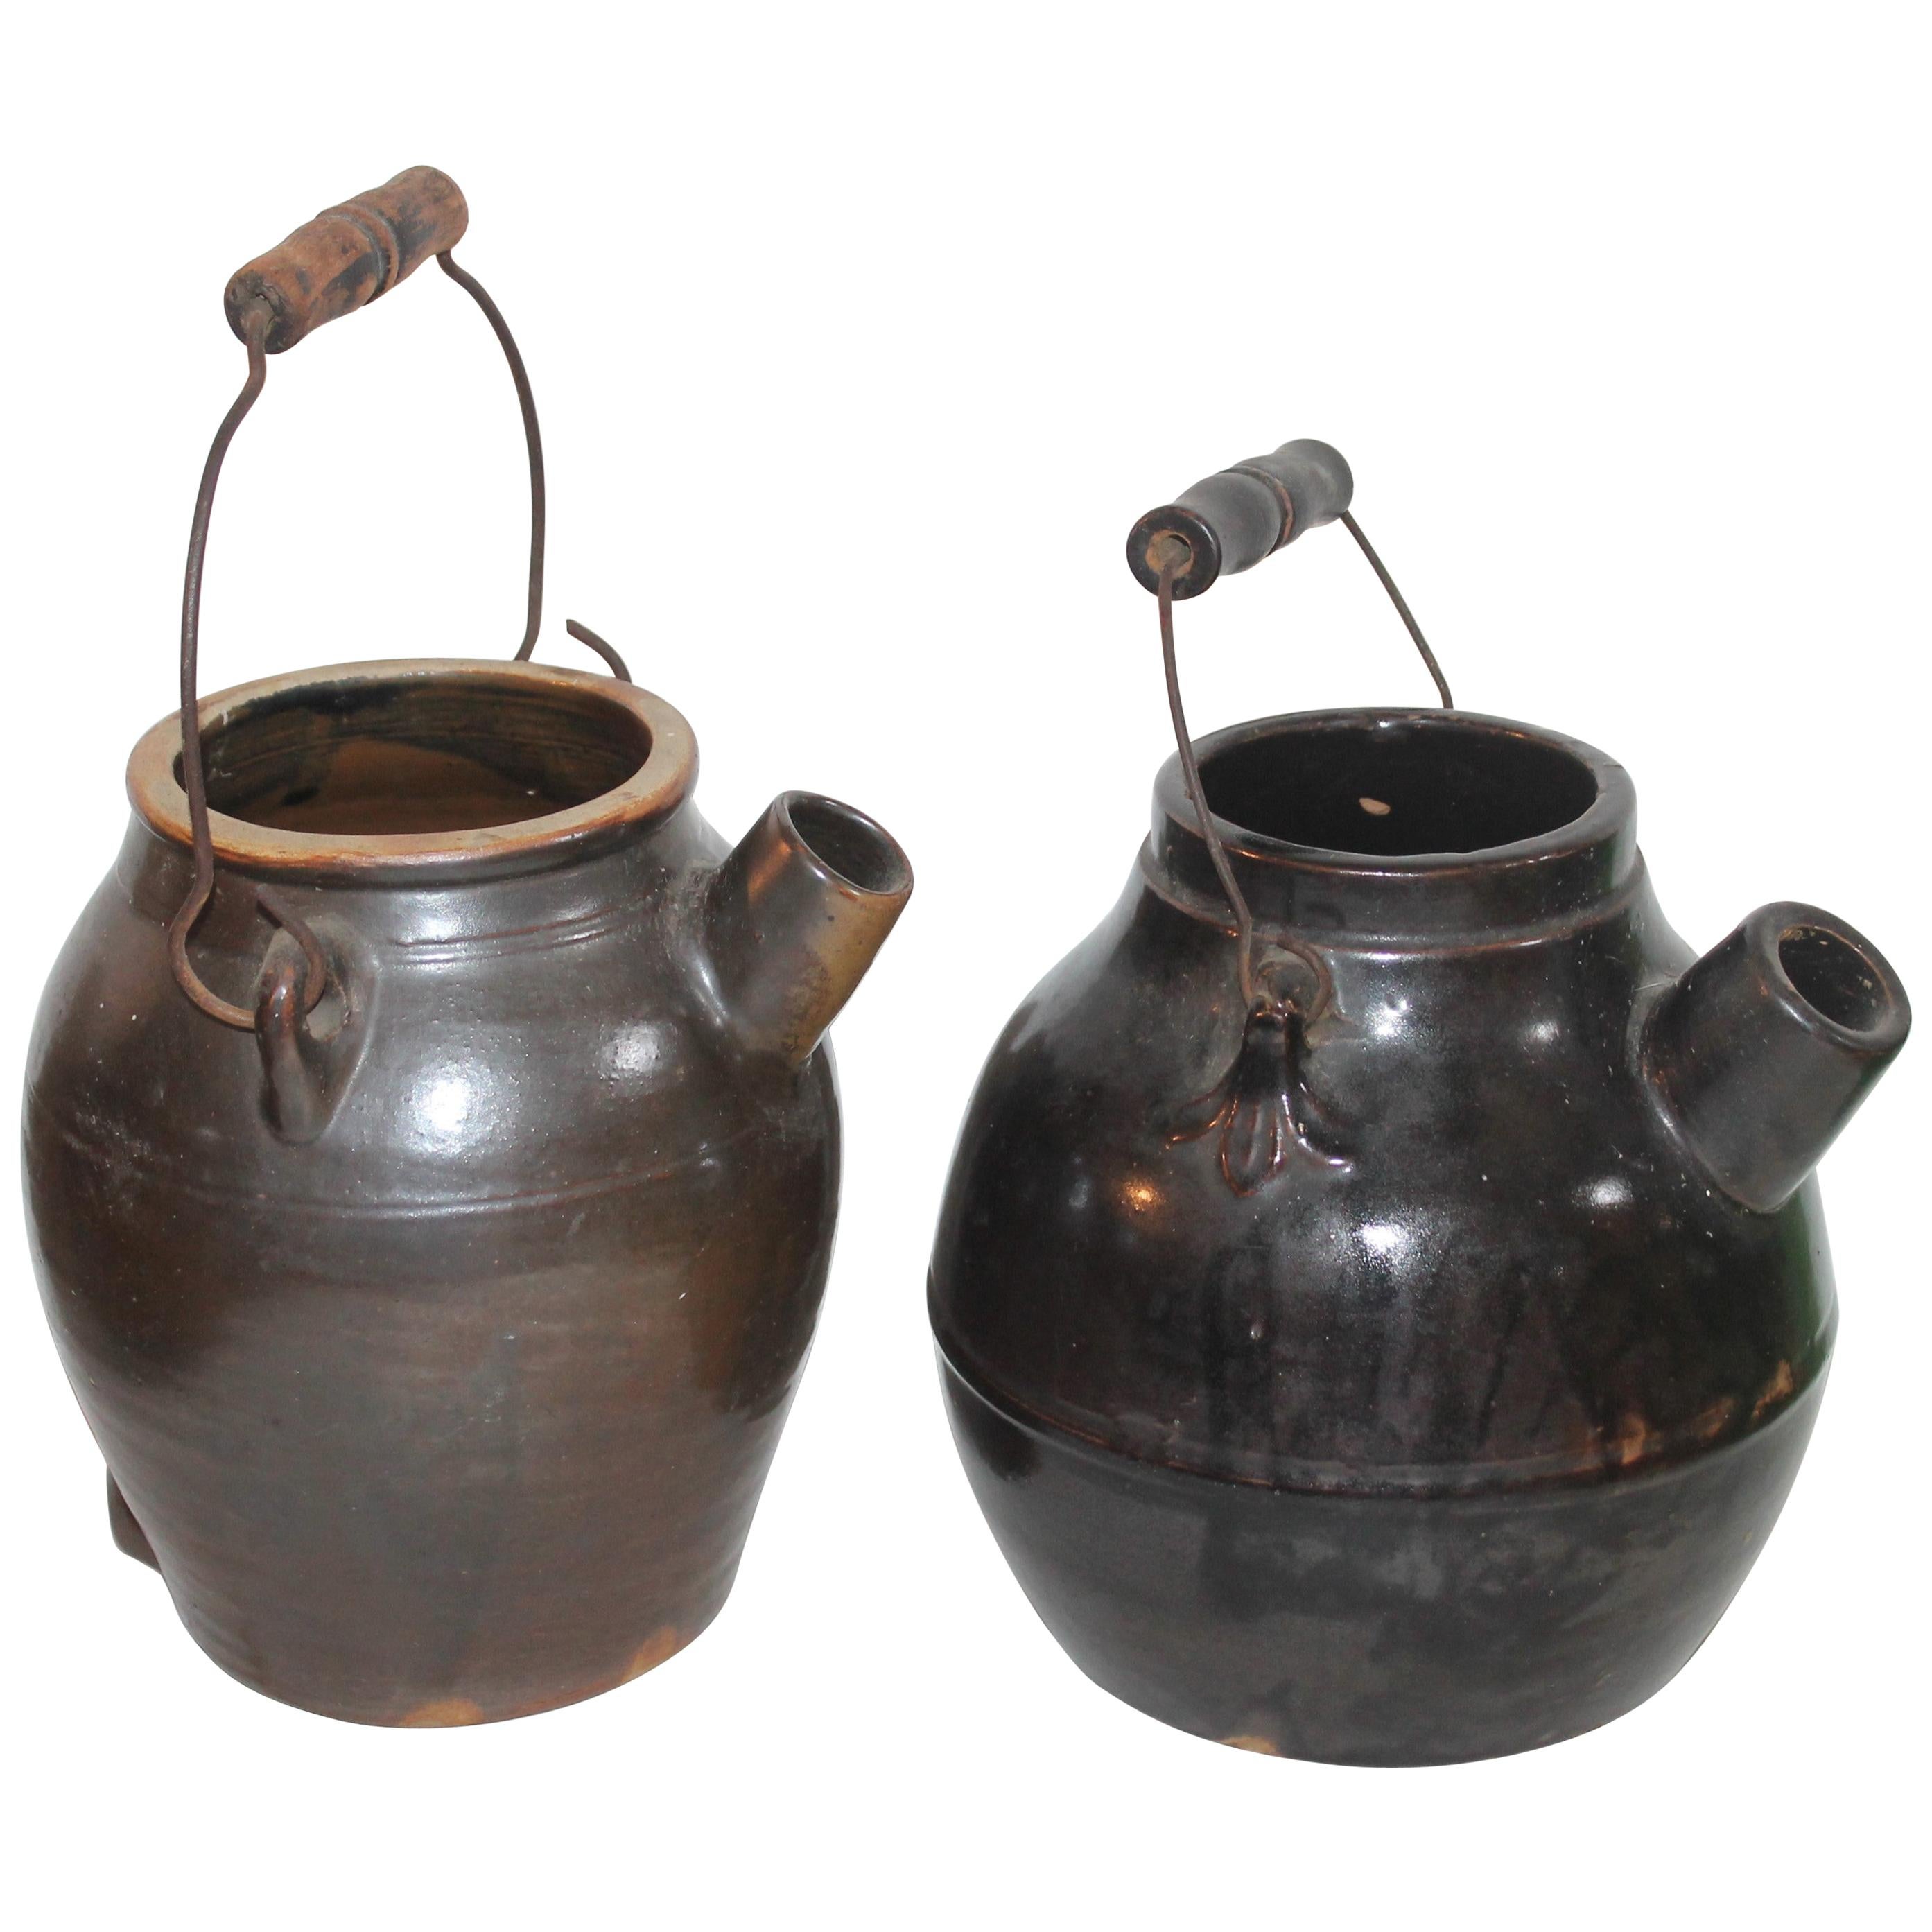 2 Pottery Batter Jugs with Original Wire Handles, 19th Century